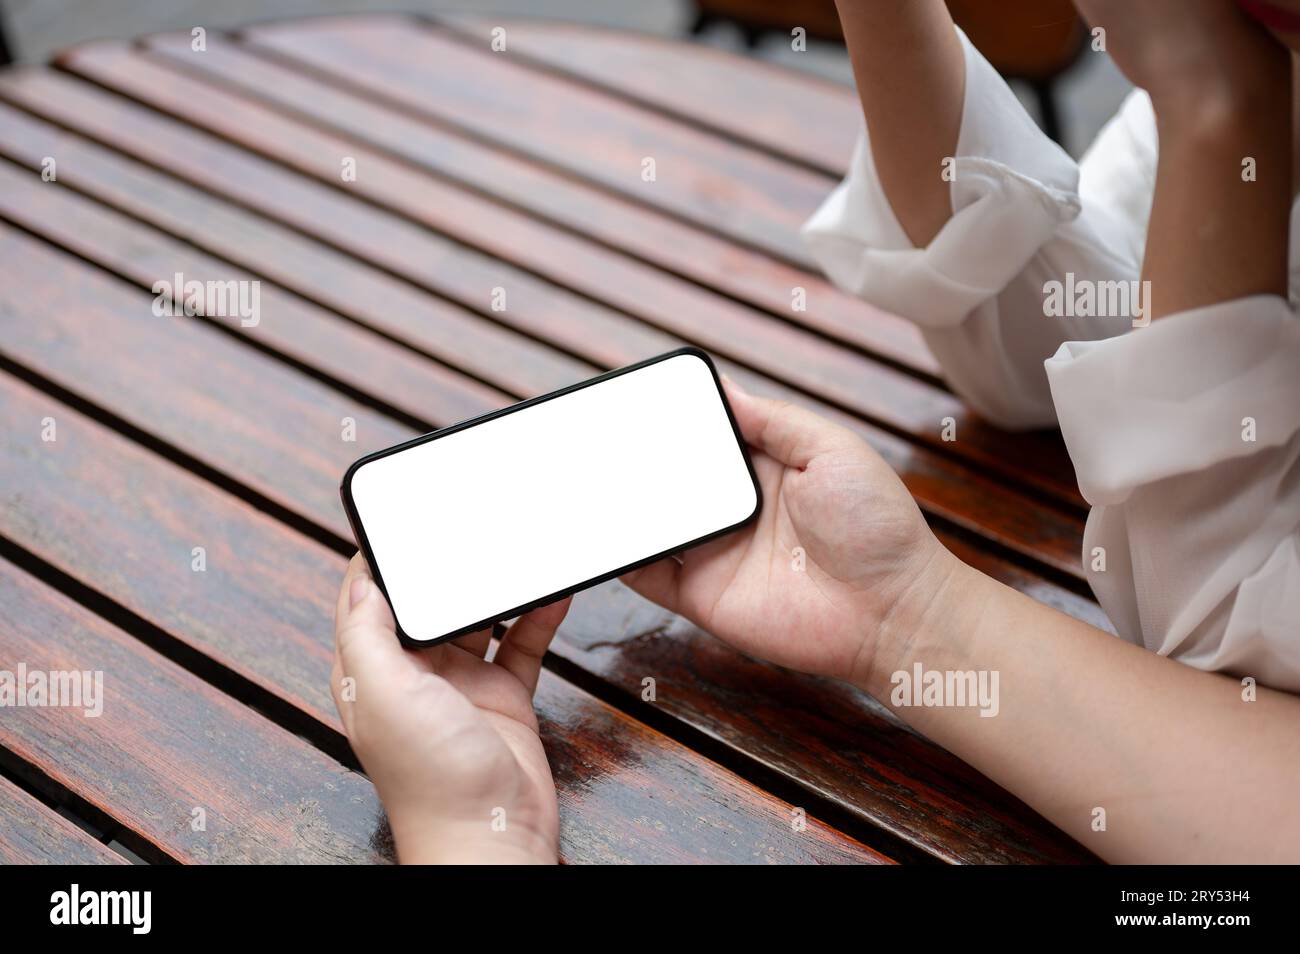 Close-up image of a woman holding a white-screen smartphone mockup in a horizontal position while sitting at a table with her friend. watching video, Stock Photo